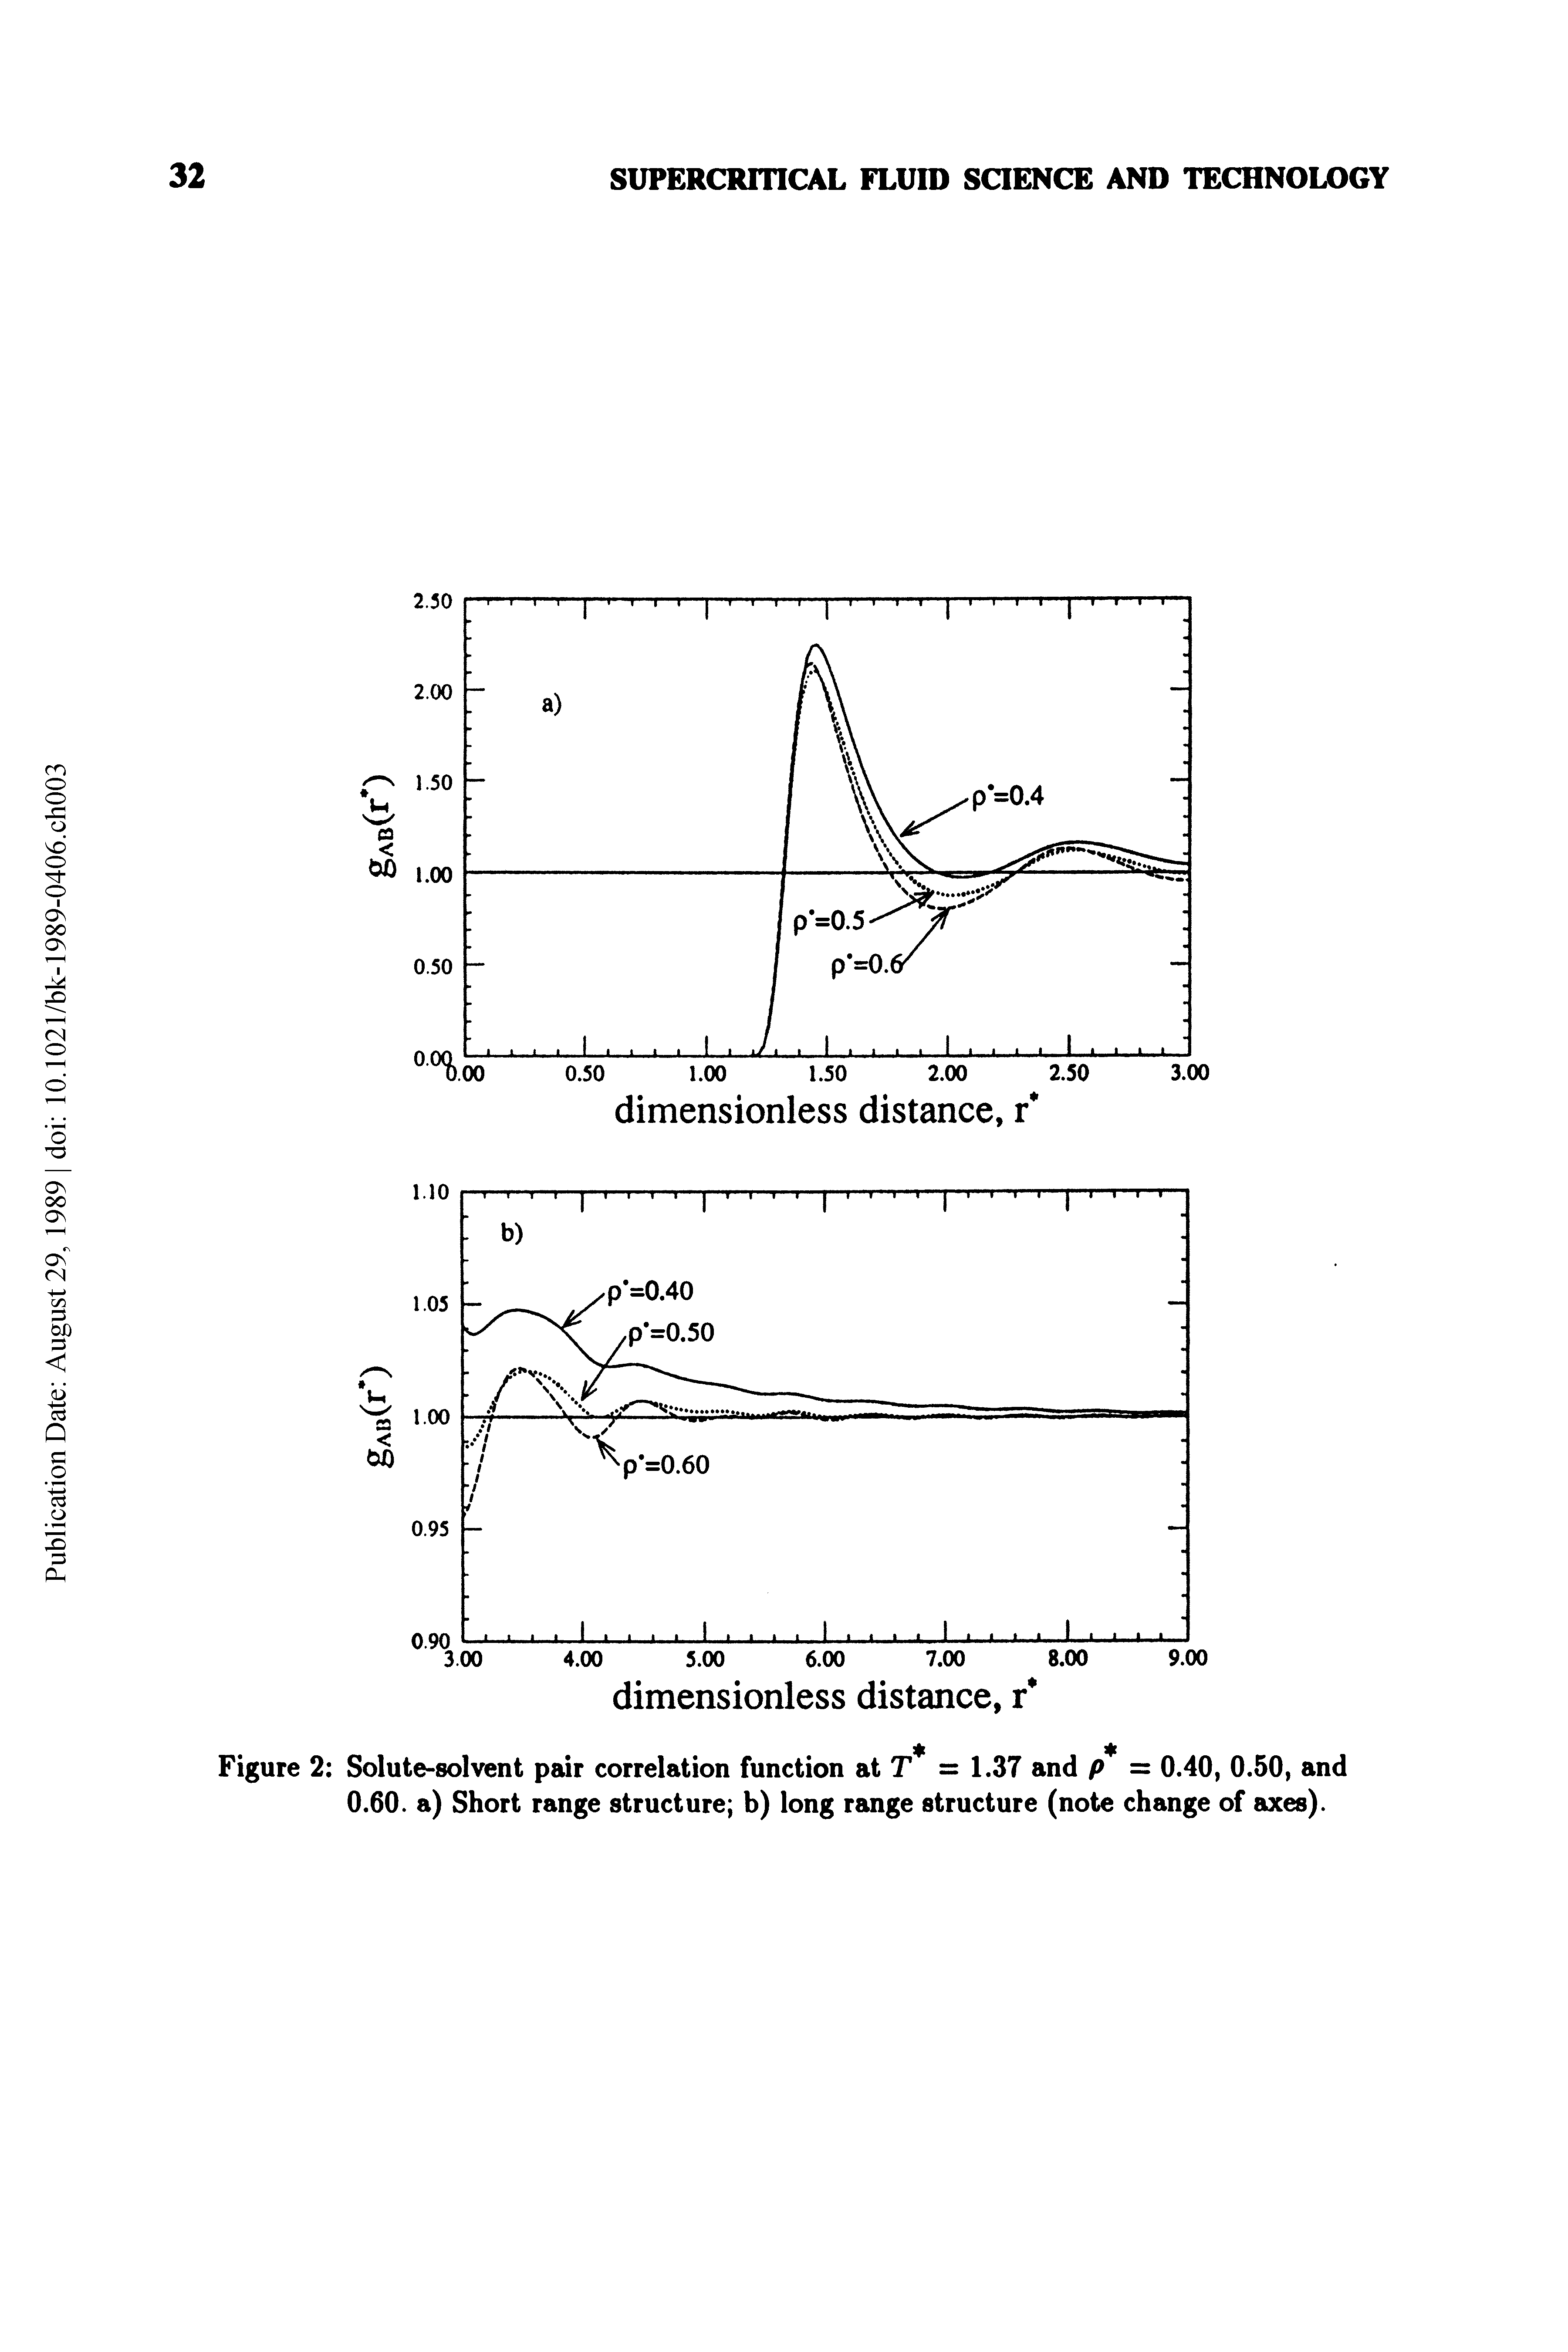 Figure 2 Solute-solvent pair correlation function at T = 1.37 and p = 0.40, 0.50, and 0.60. a) Short range structure b) long range structure (note change of axes).